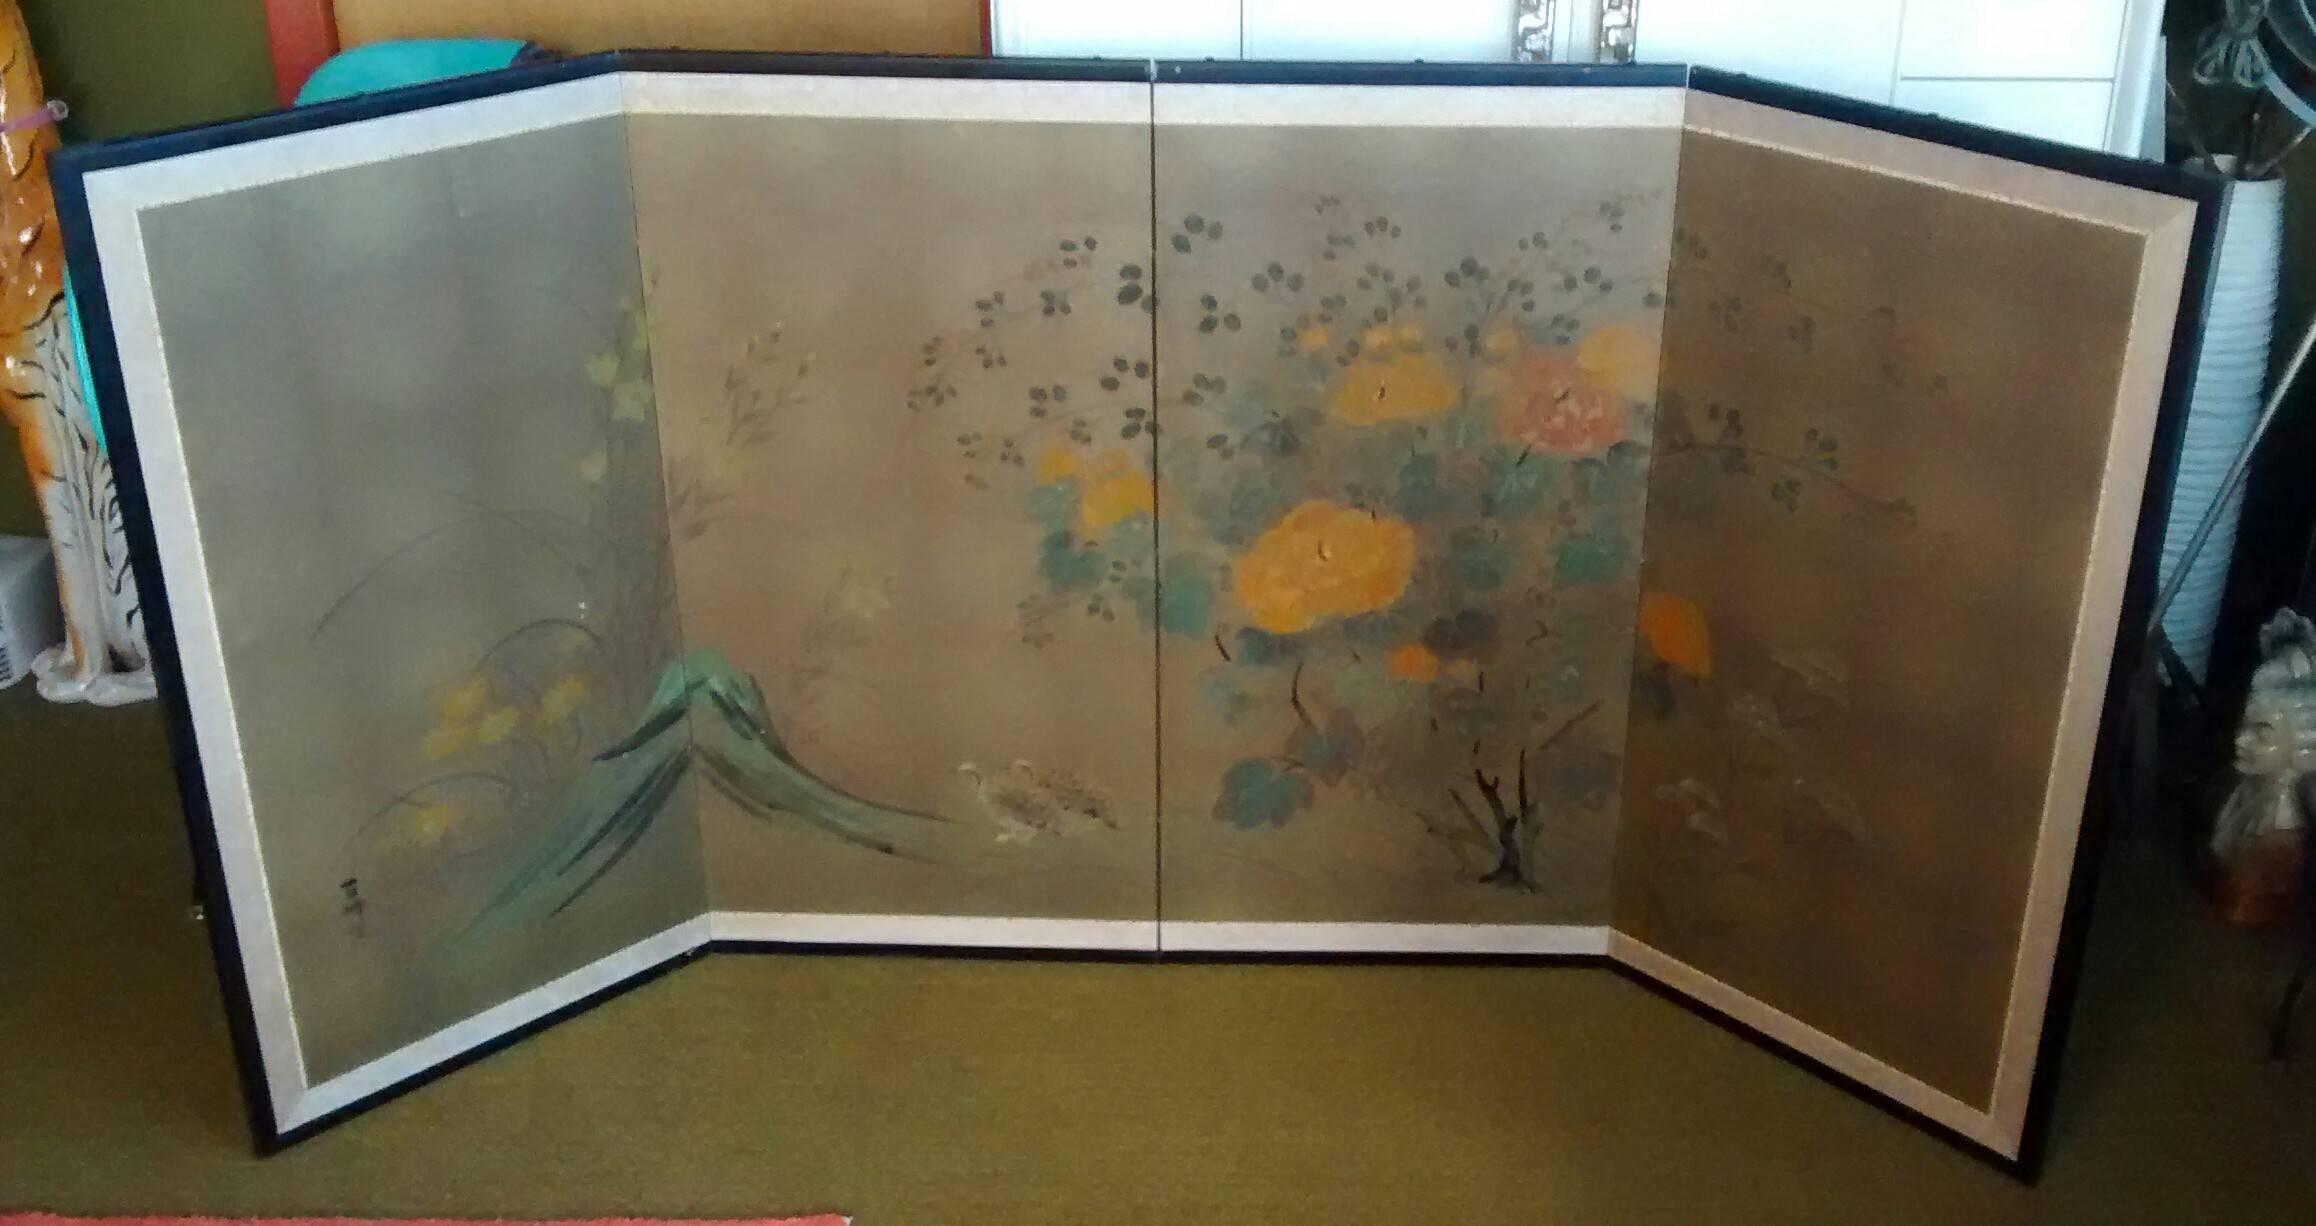 Lovely 1930s period Japanese table top size folding screen. 

Rendered on gold leafed paper, hand painted, including chrysanthemums, a stylized Mt. Fuji, and a pair of birds. 

Signed in the lower left corner. Edged in silk, and framed in